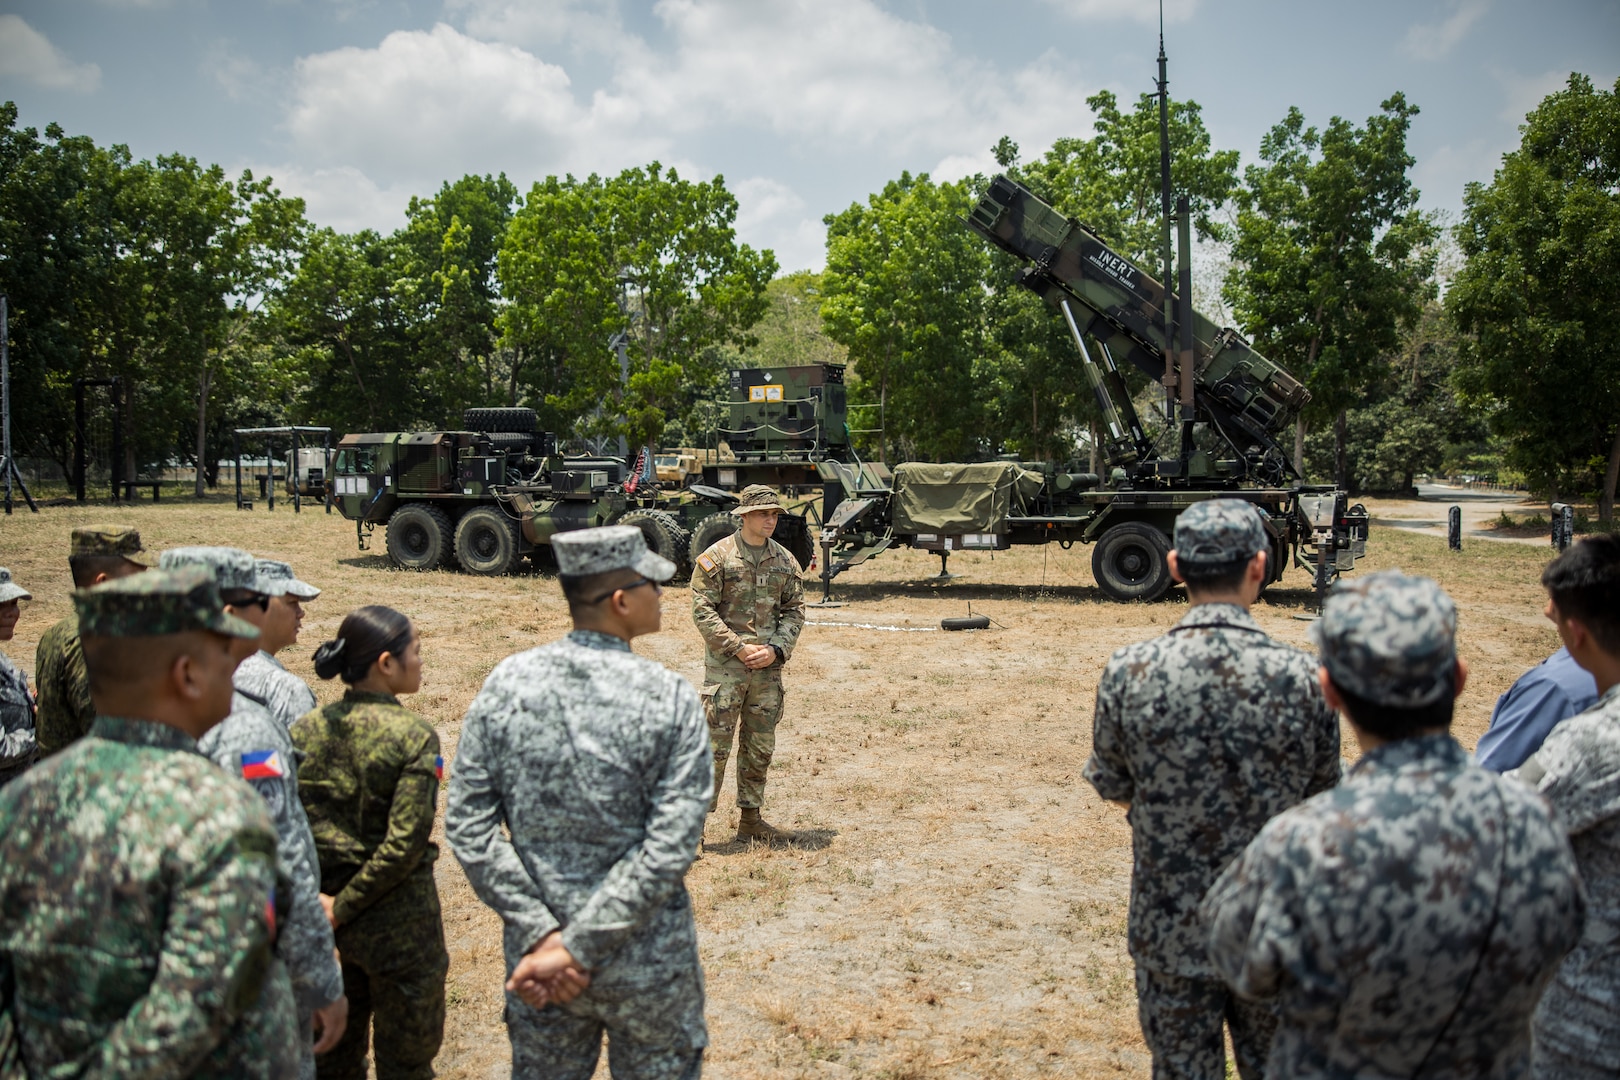 U.S. Army 1st Lt. Christian de Jong, Bravo Battery, 1-1 Air Defense Artillery, 38th Air Defense Brigade, listens to questions in front of the M903 Launching Station for the MIM-104 Patriot System as part of the Joint Integrated Air And Missile Defense exchange during Exercise Balikatan 24 at Clark Air Base, Philippines, April 25, 2024. BK 24 is an annual exercise between the Armed Forces of the Philippines and the U.S. military designed to strengthen bilateral interoperability, capabilities, trust, and cooperation built over decades of shared experiences. (U.S. Army photo by Maj. Trevor Wild)